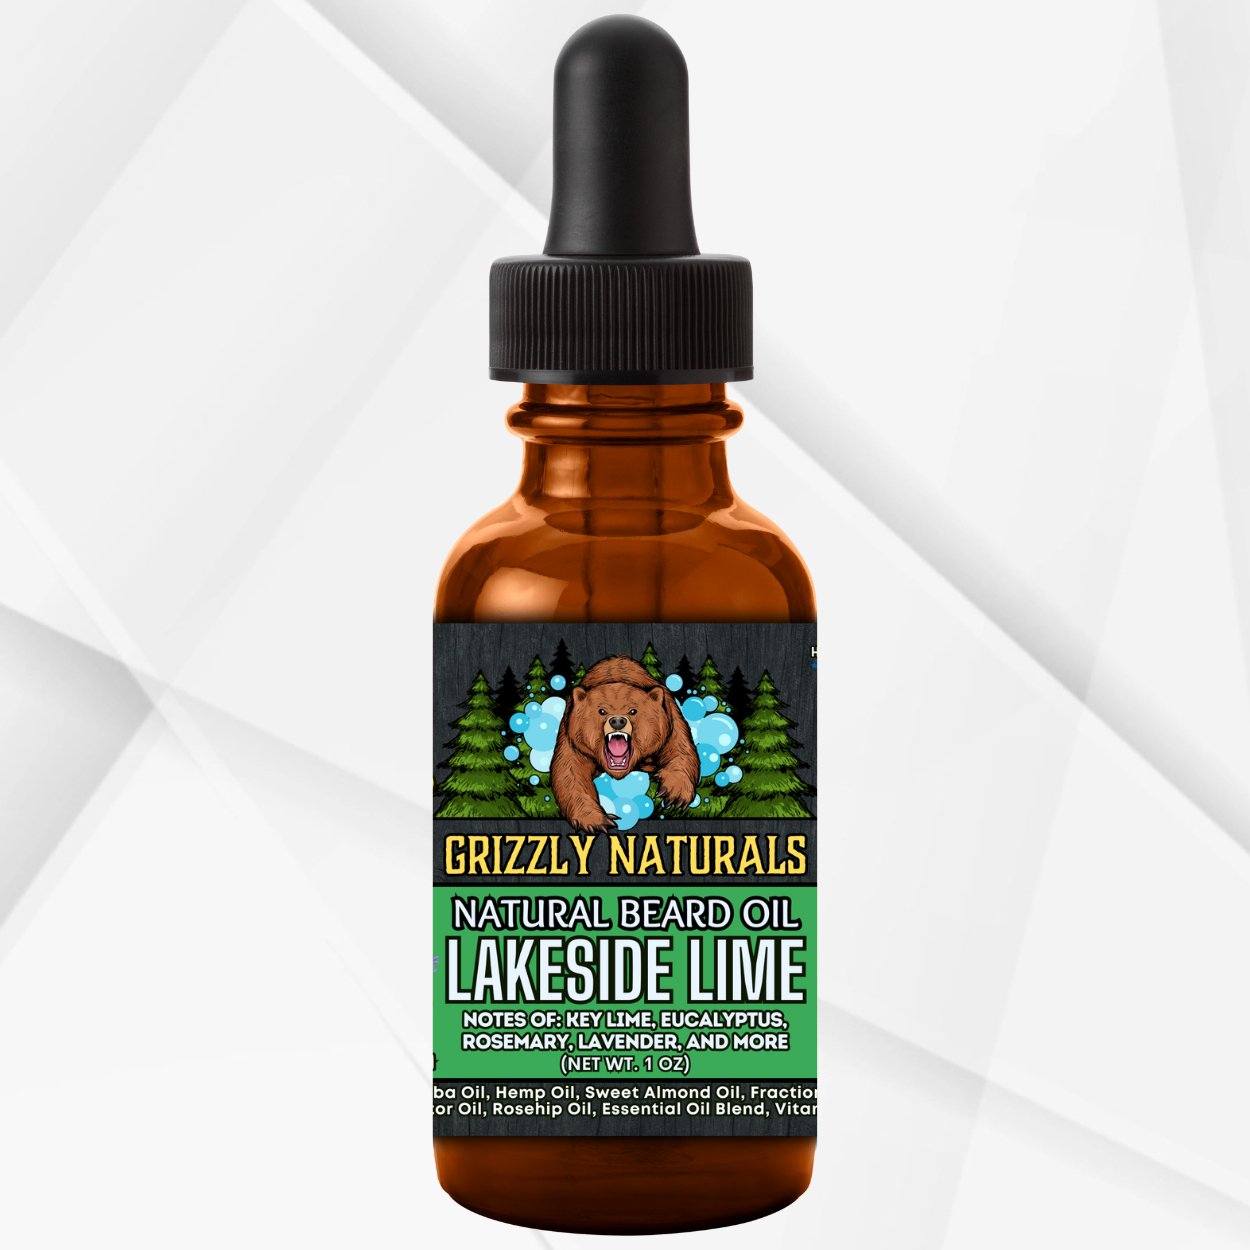 BEARD OIL - Lakeside Lime - Grizzly Naturals Soap Company